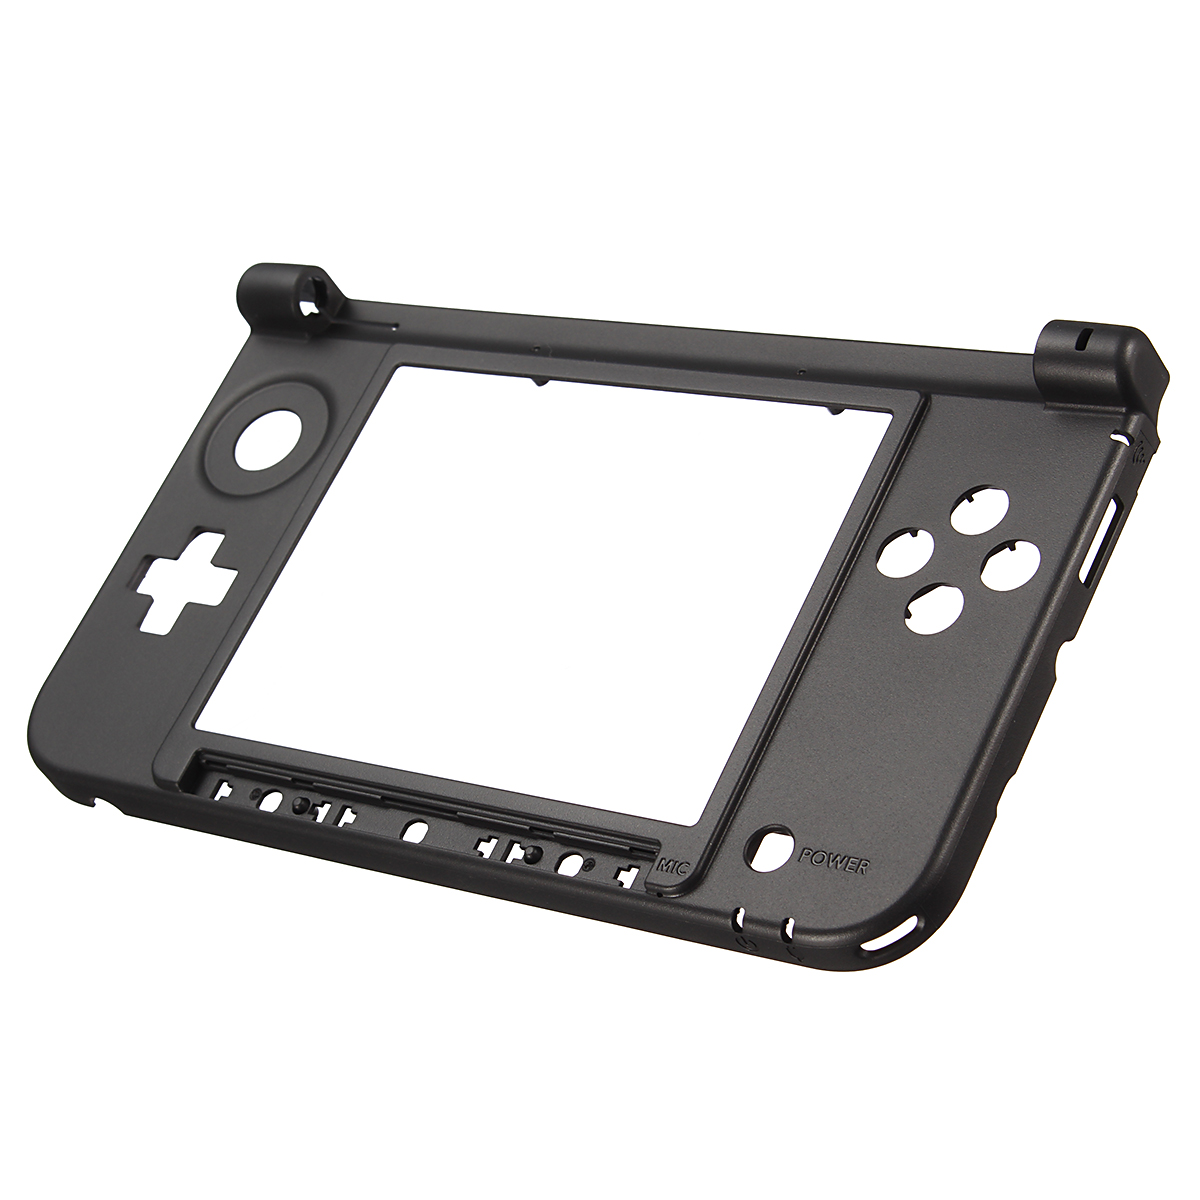 Replacement Bottom Middle Frame Housing Shell Cover Case for Nintendo 3DS XL 3DS LL Game Console 12